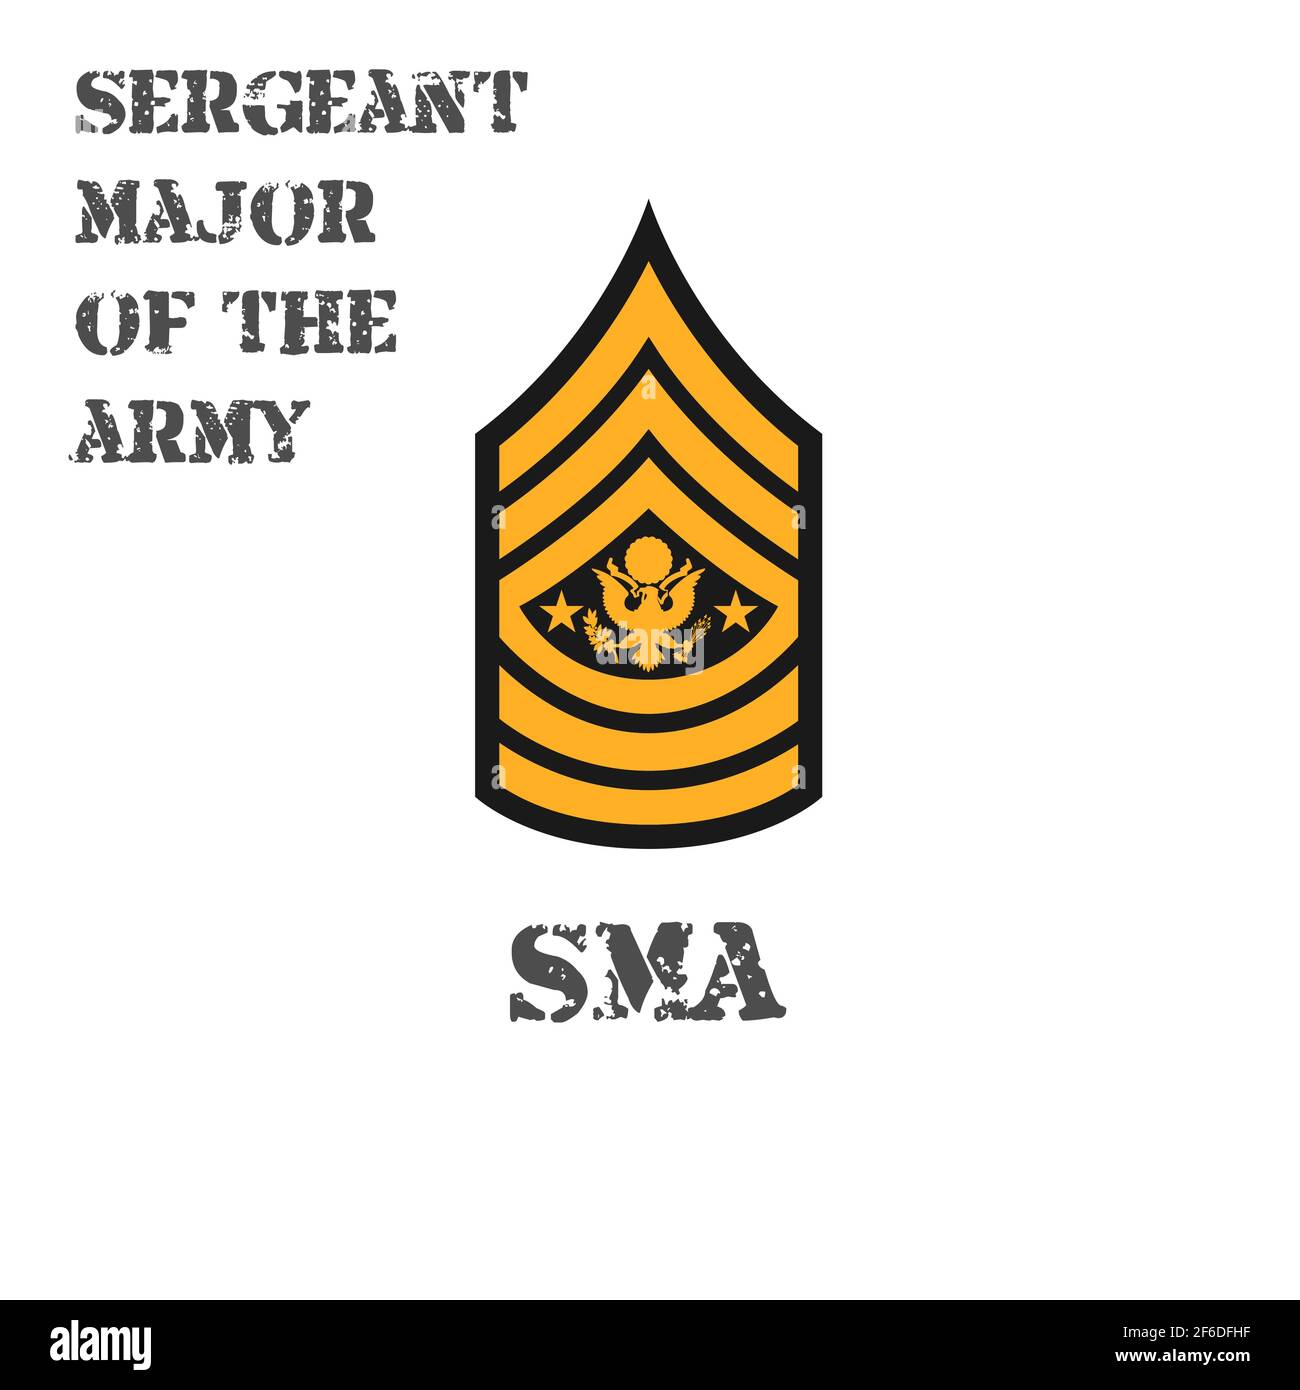 Realistic vector icon of the chevron of a sergeant major of the army of the United States. Description and abbreviated name. Stock Vector